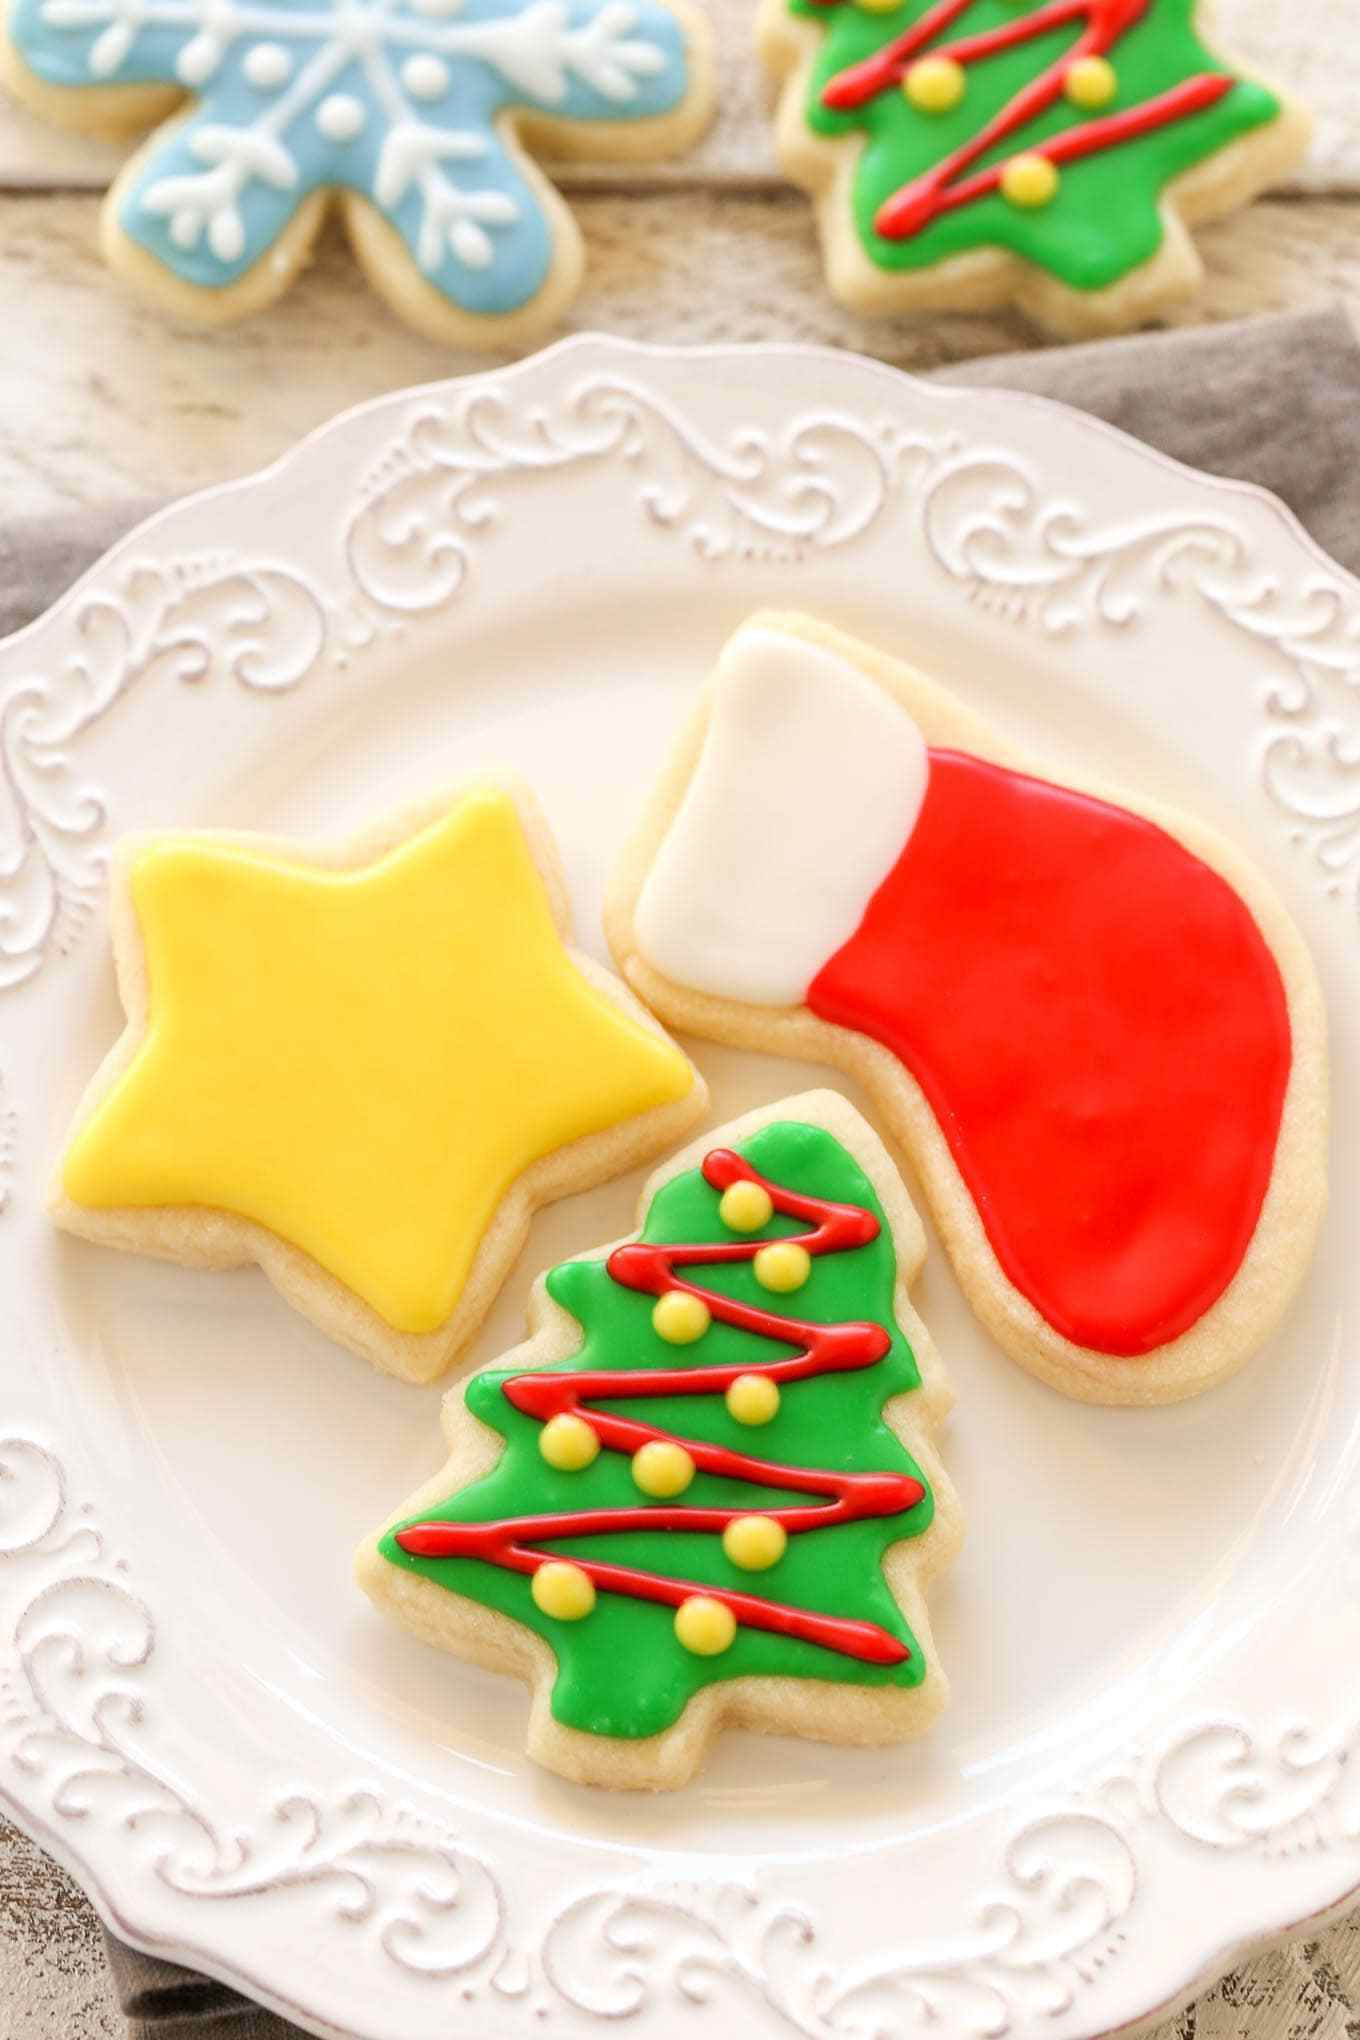 Christmas Cut Out Cookies
 Soft Christmas Cut Out Sugar Cookies Live Well Bake ten